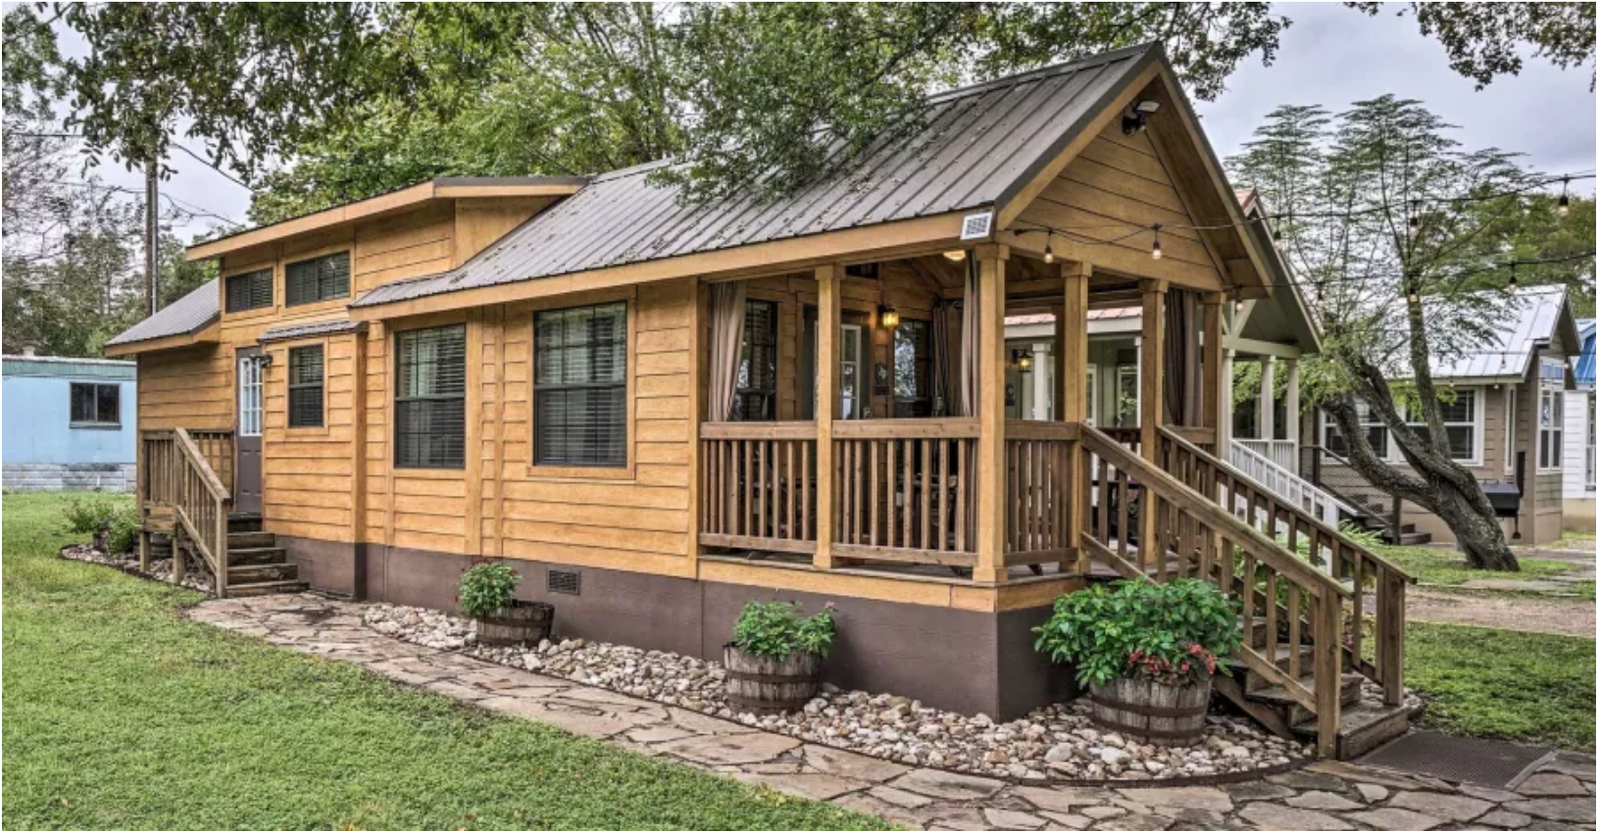 Kick Back And Relax In This Cozy Cabin In Texas